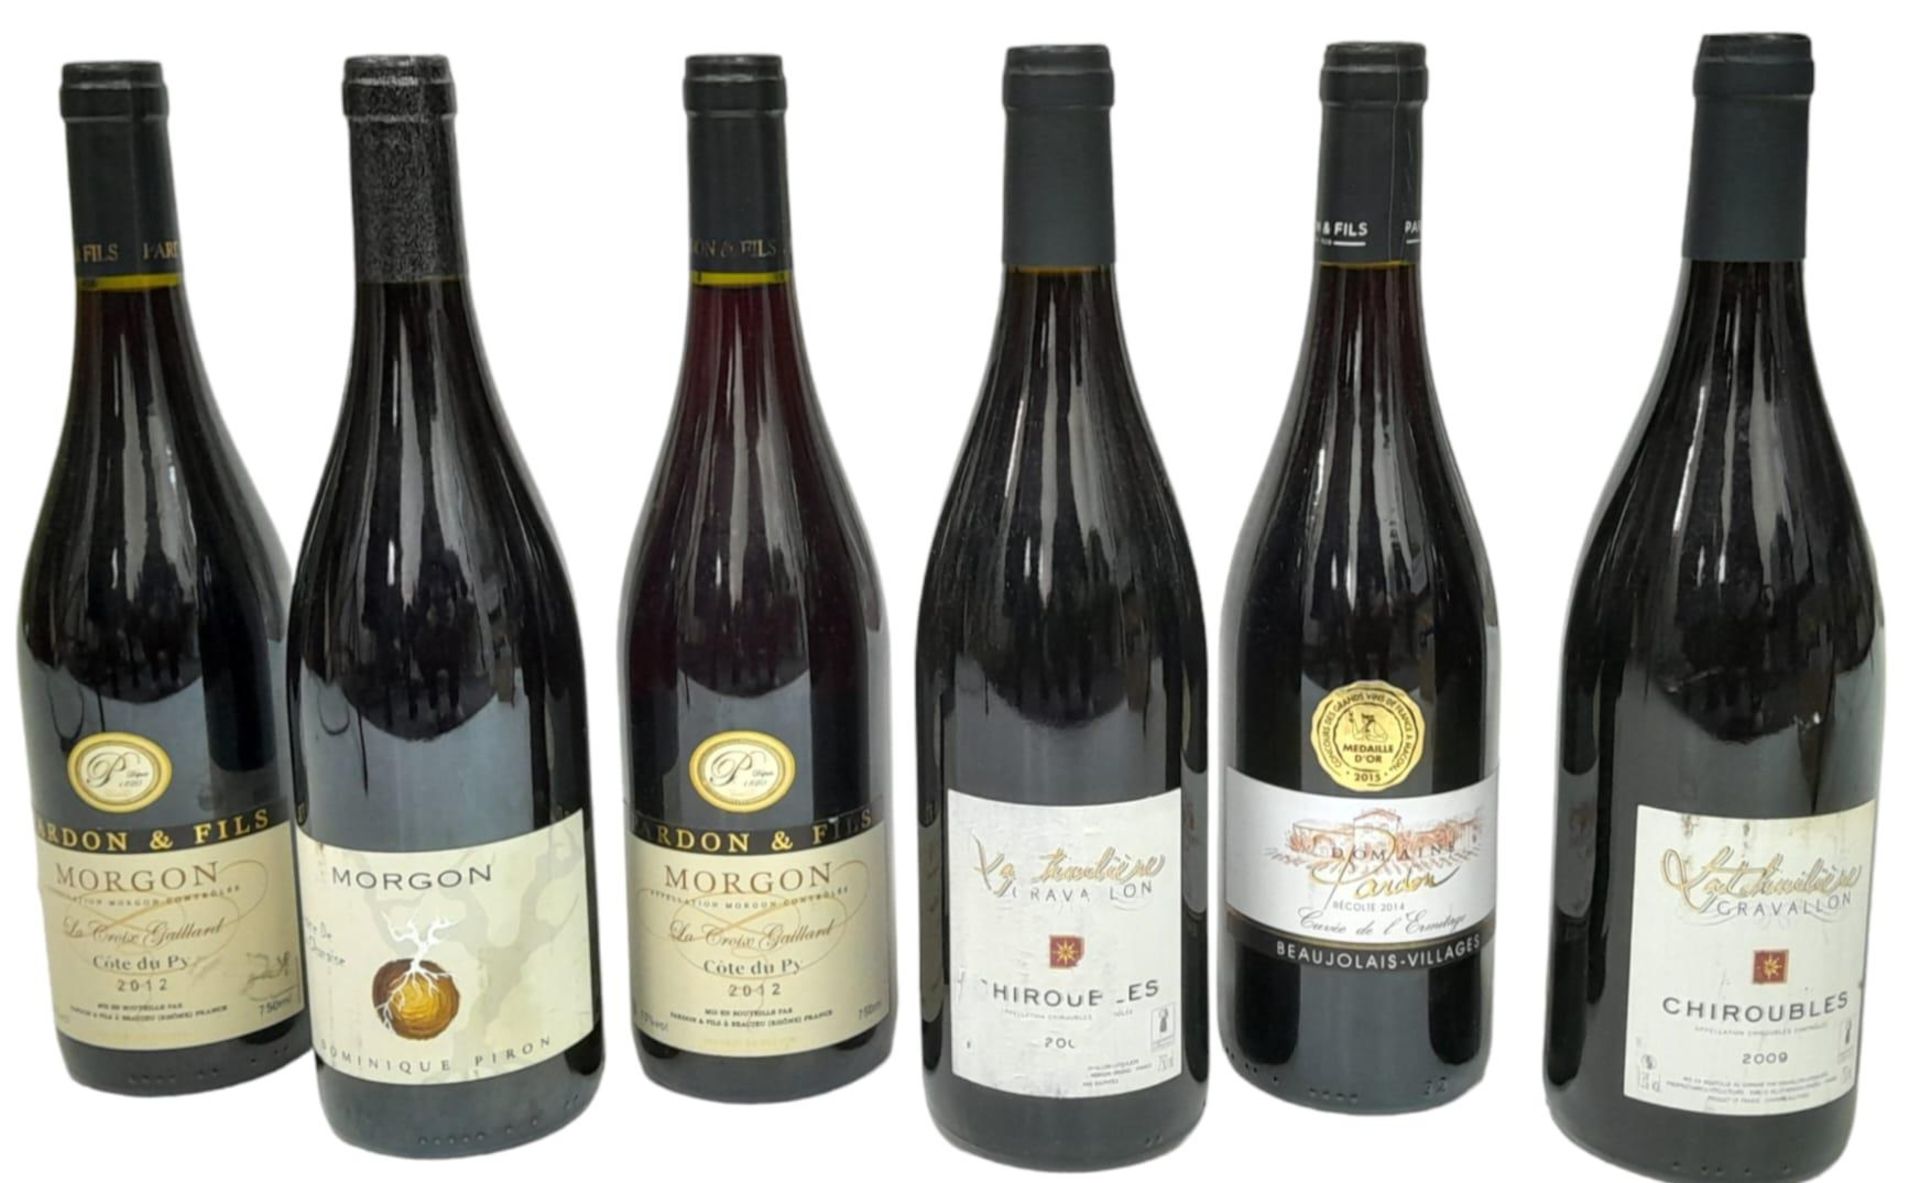 6 Bottles of Cru Beaujolais Consisting of: 2 x Chiroubles Domaine Gravallon Lathuliere 2009 2 x